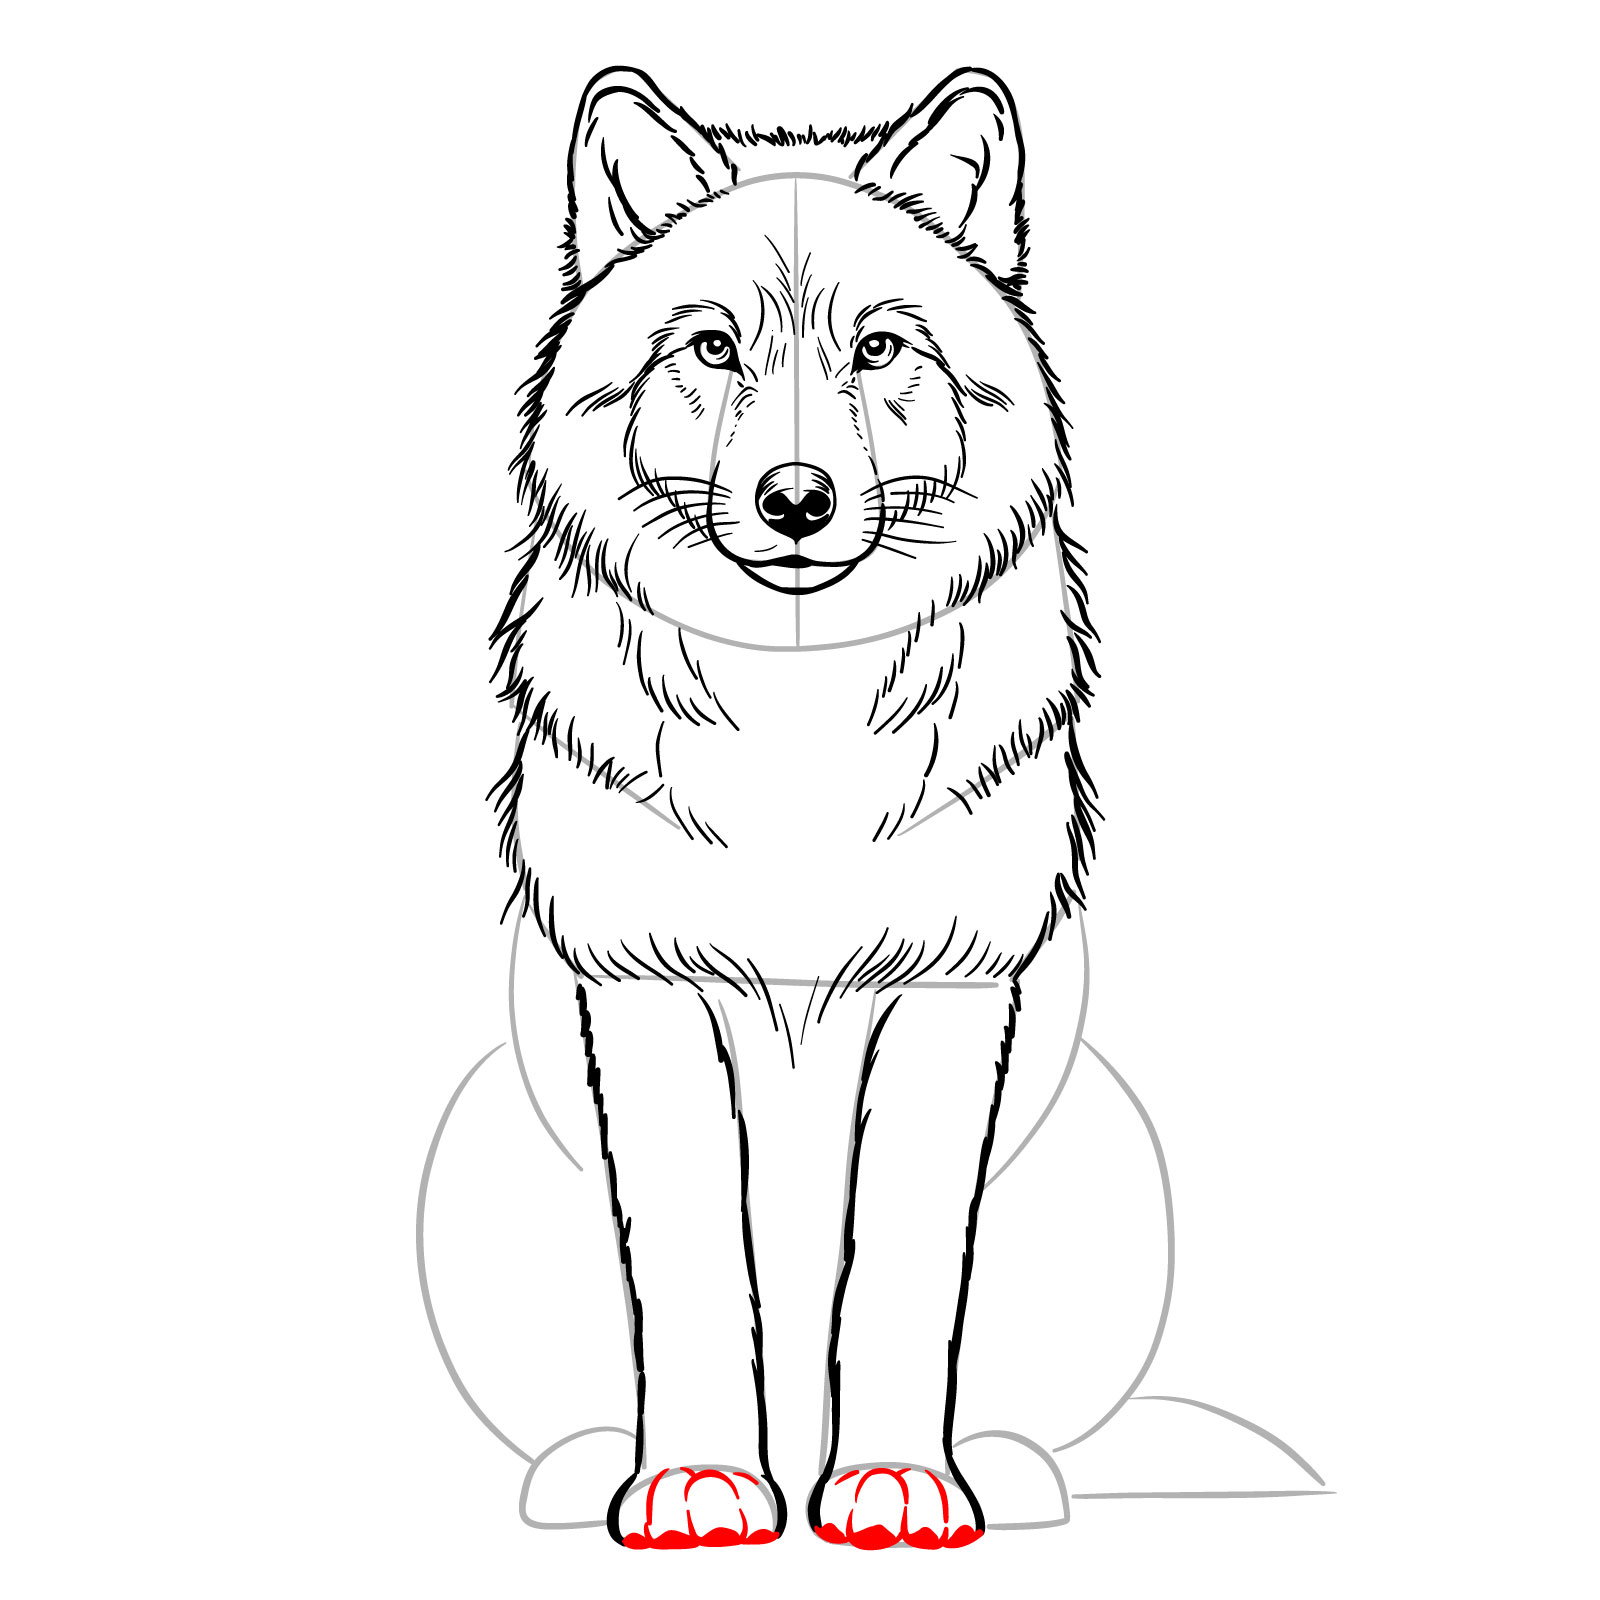 Sketching the front paws of a sitting wolf drawing step-by-step - step 13